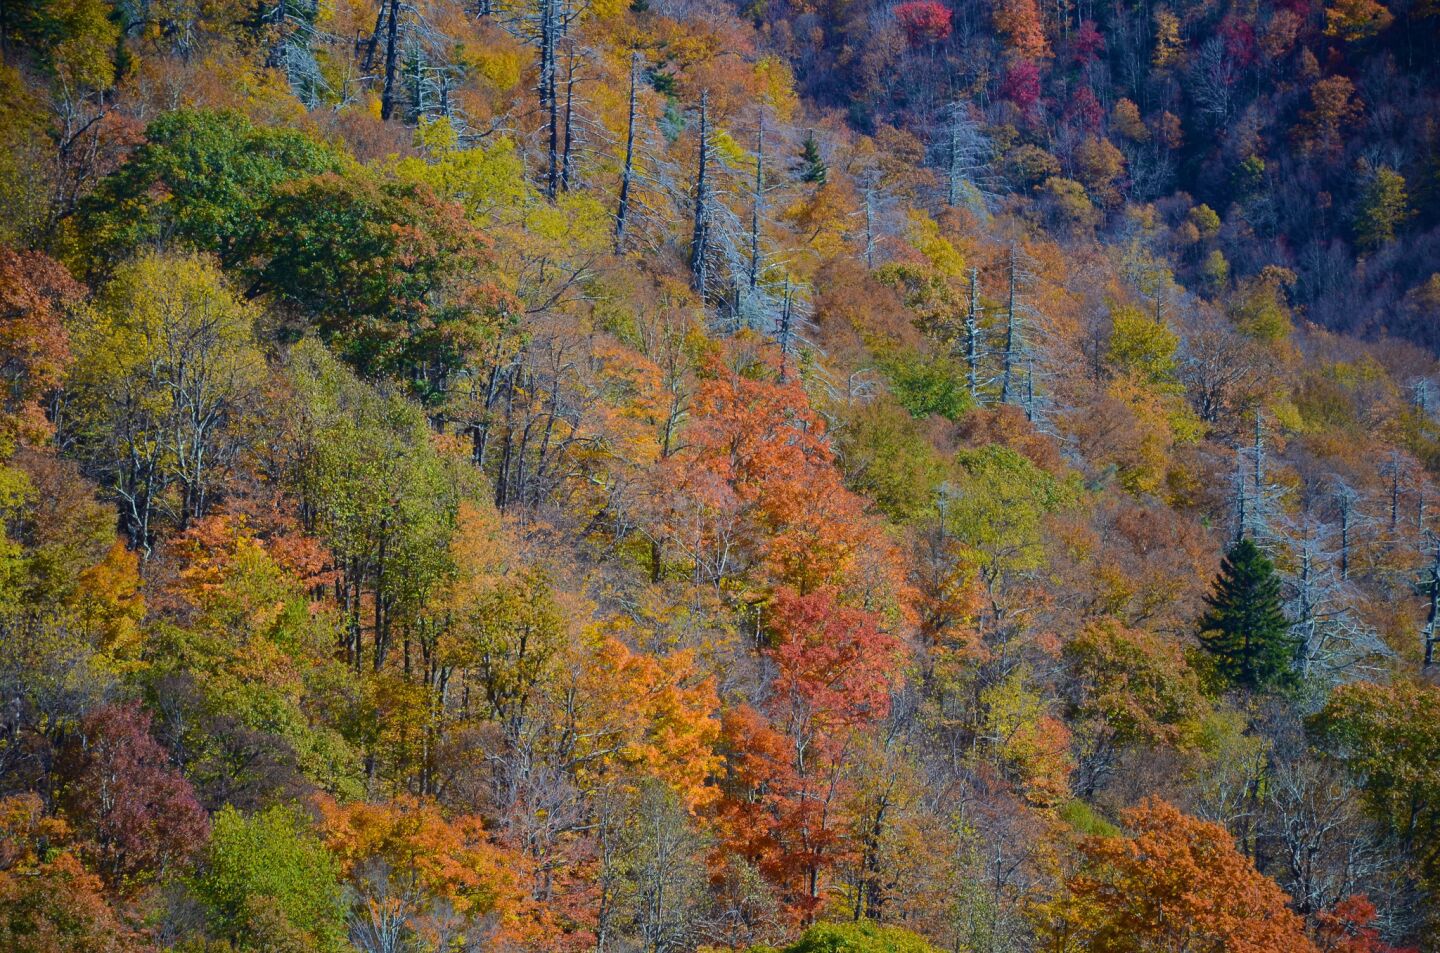 This foliage detail was at East Fork Overlook on Oct. 23 along the Blue Ridge Parkway in North Carolina.